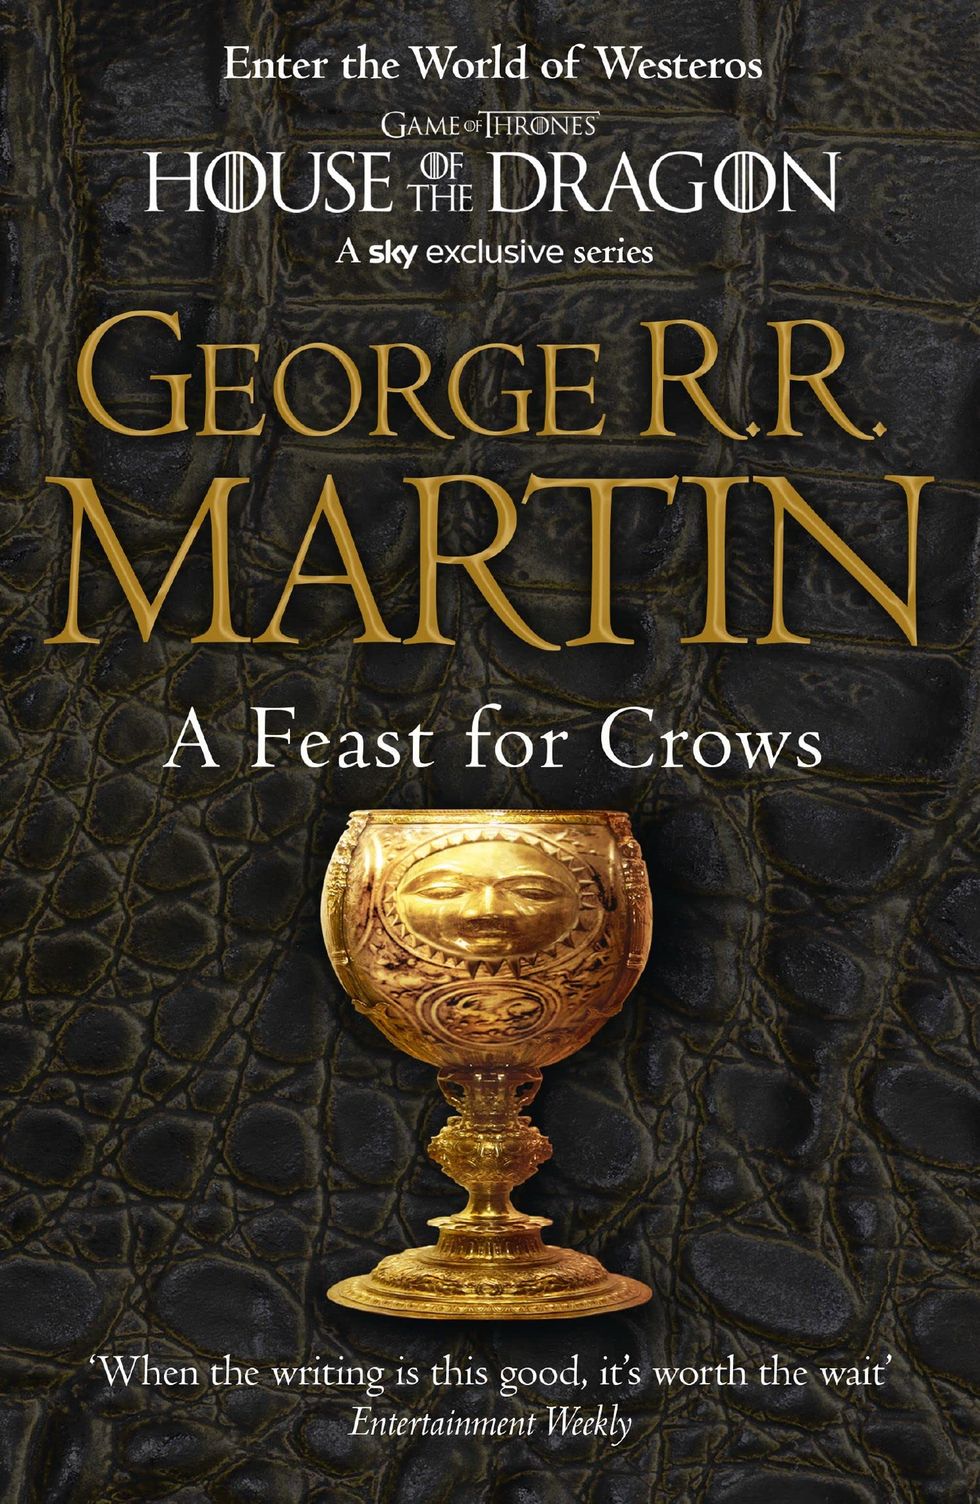 6. A Feast for Crows